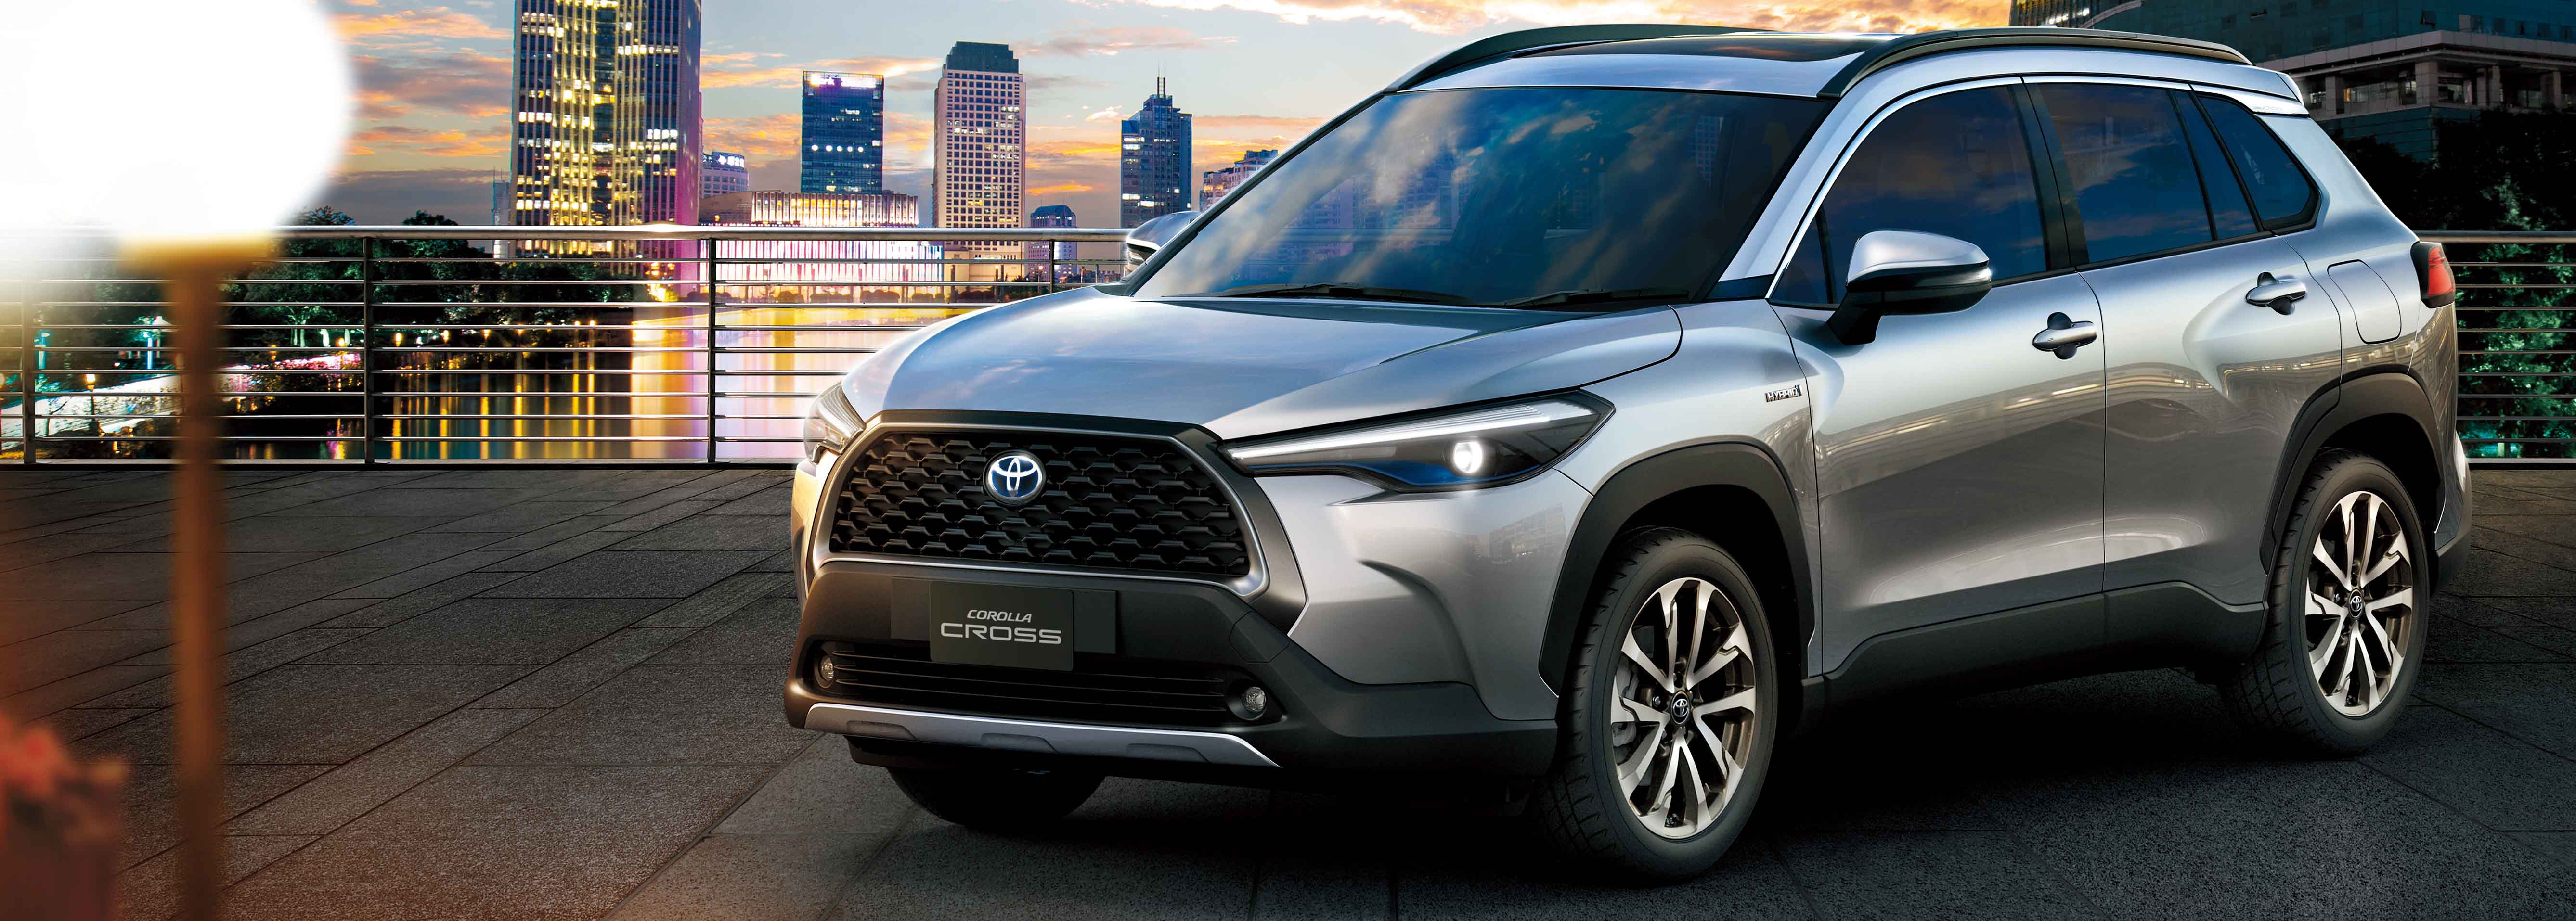 Toyota Corolla Cross to be built in SA